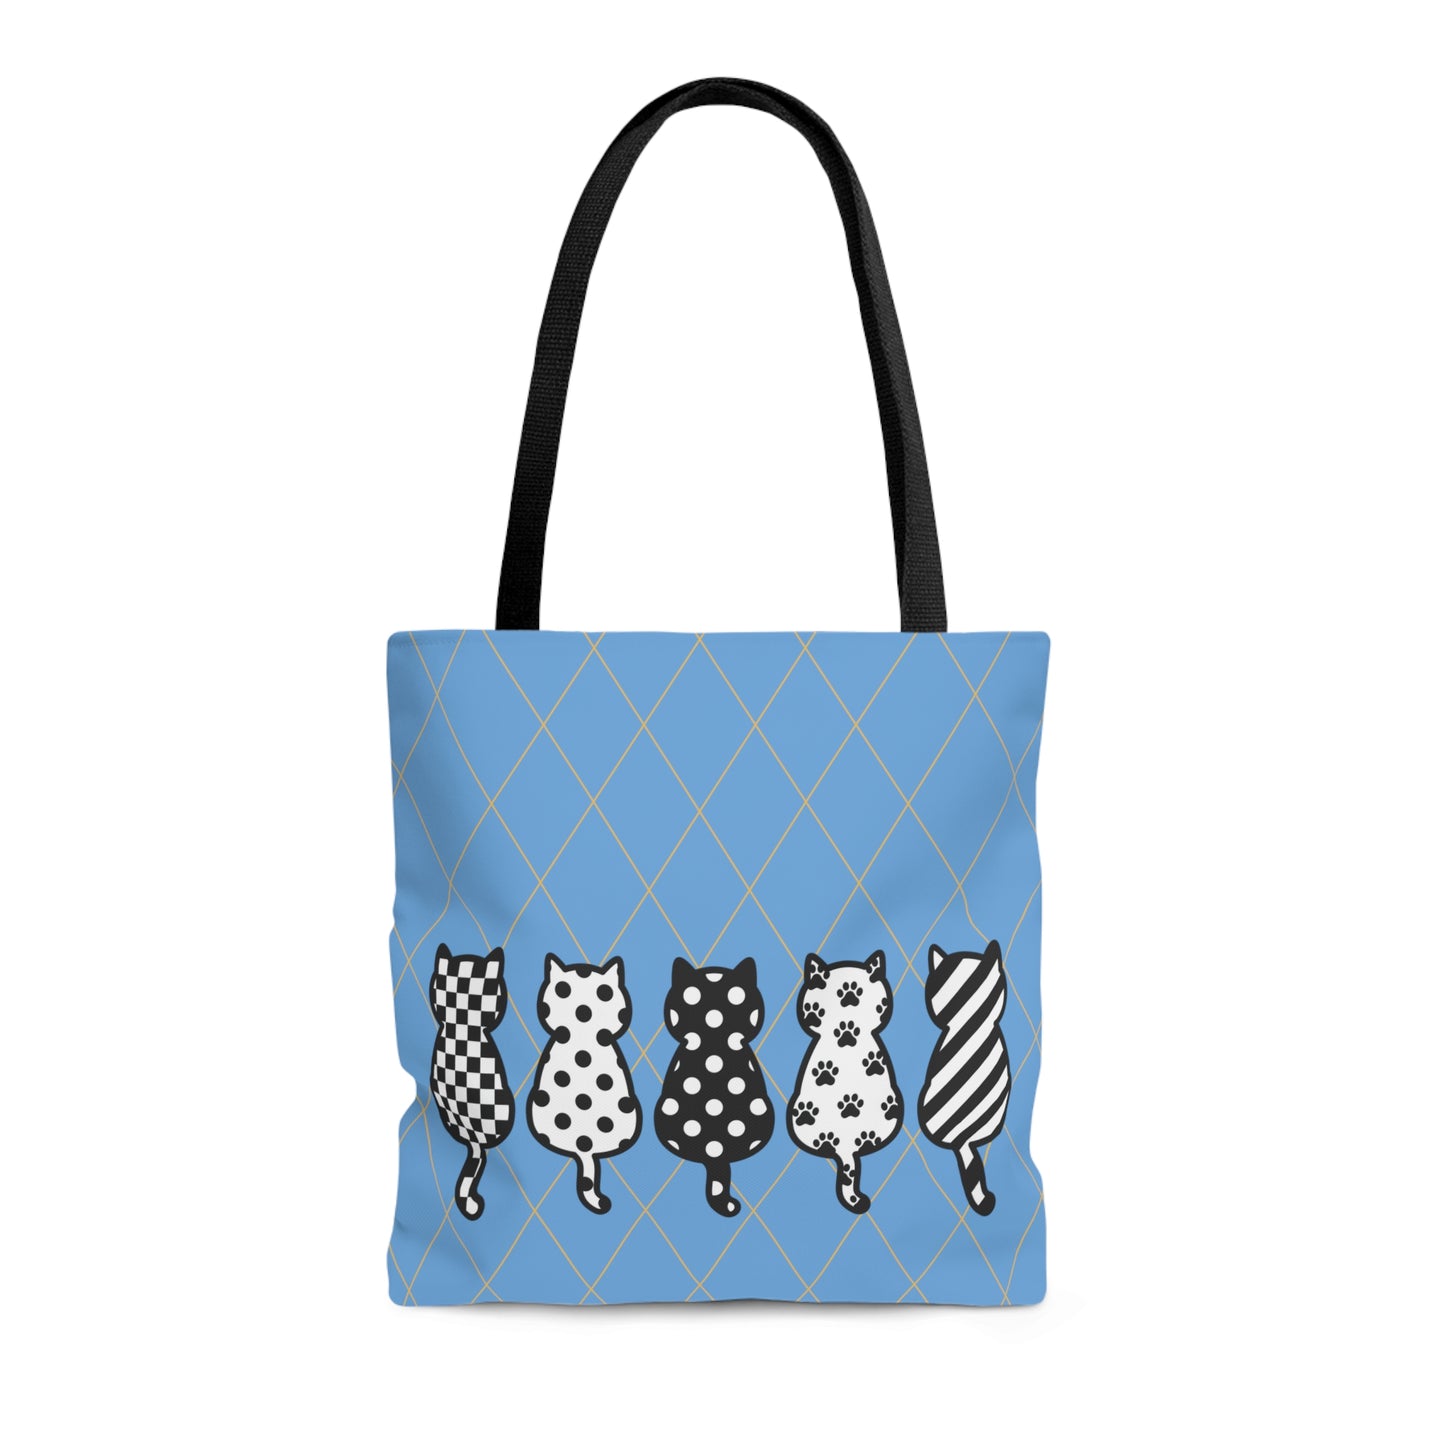 Diamond pattern with Five Cat's Design Tote Bag (AOP)